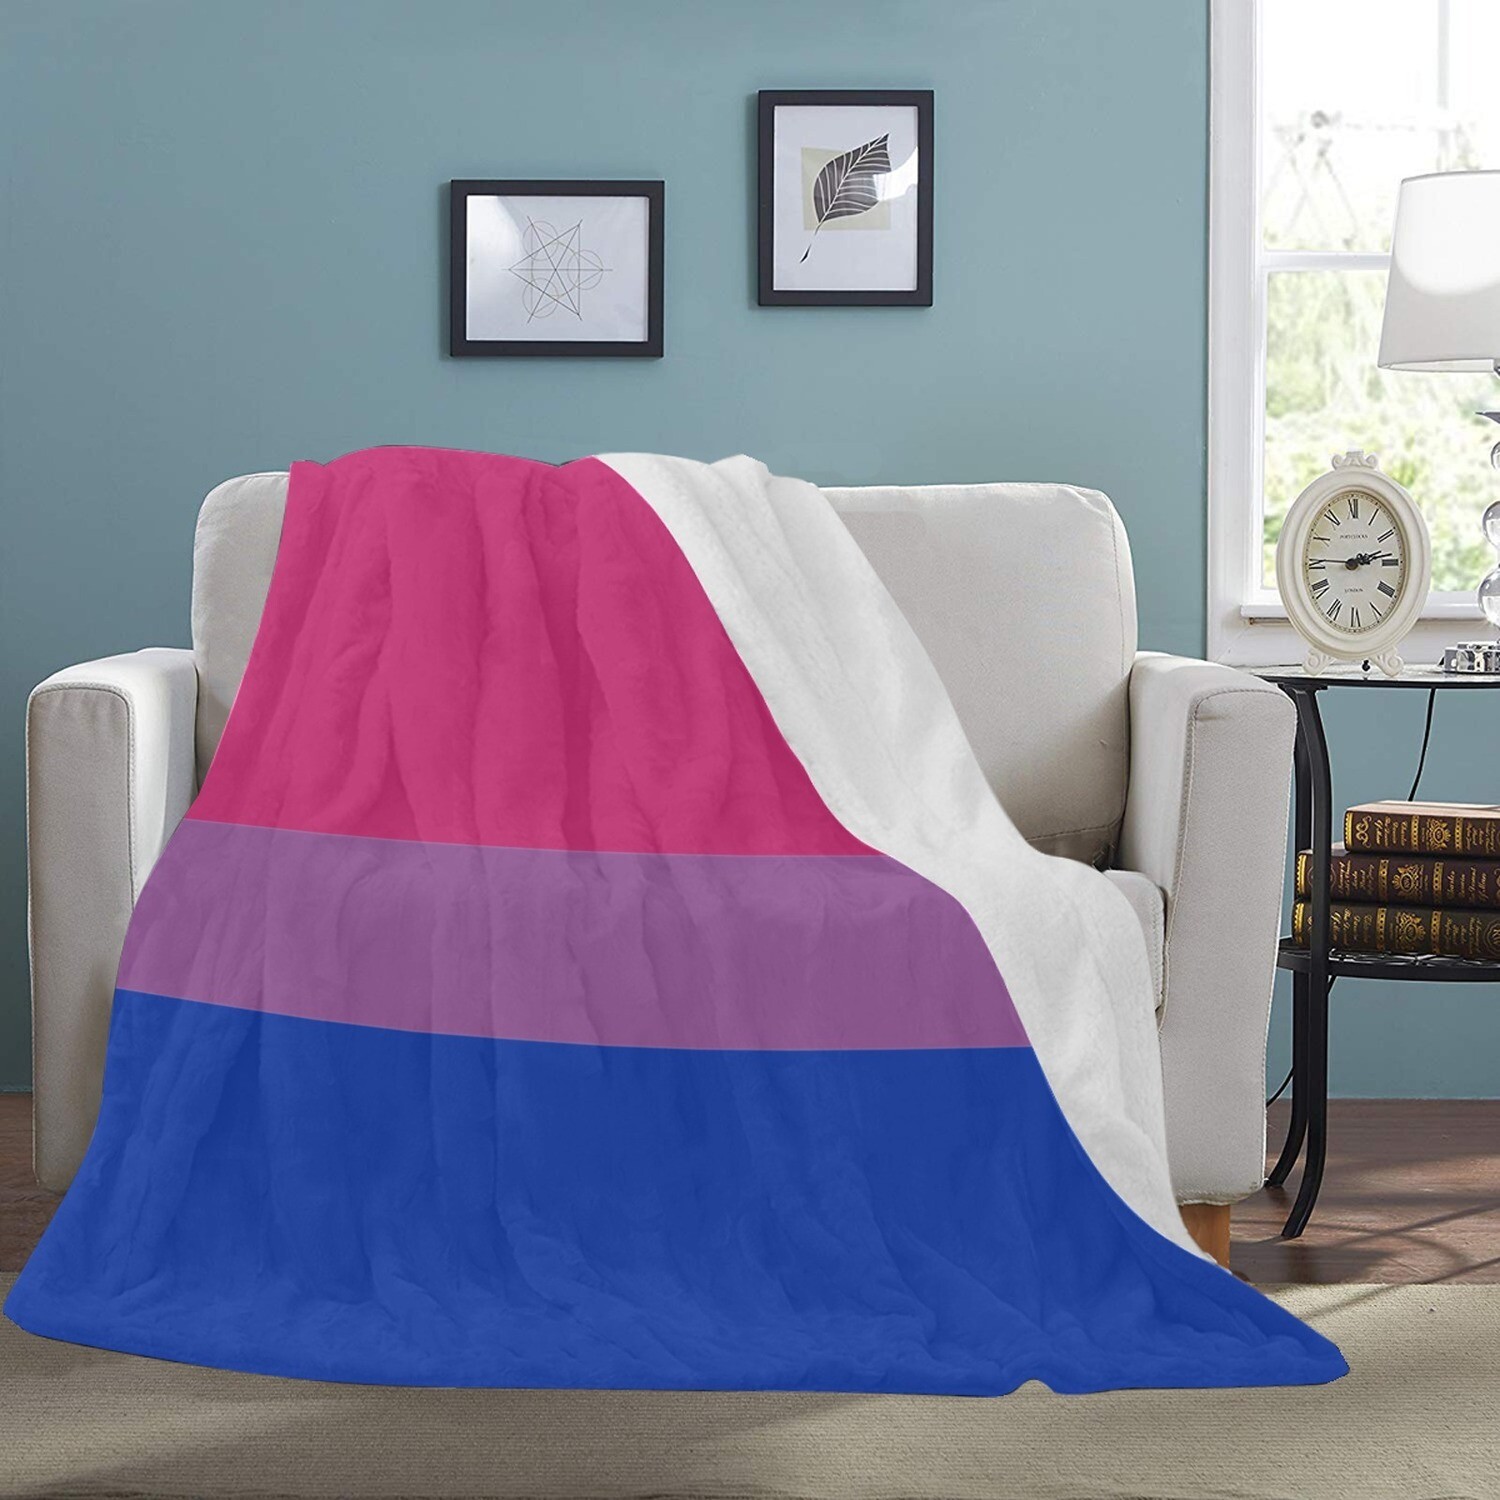 🤴🏽👸🏽🏳️‍🌈 Large Ultra-Soft Micro Fleece Blanket Love is Love Bisexual Pride Flag created by Michael Page 1998, gift, gift for her, gift for him, gift for them, 70"x80"